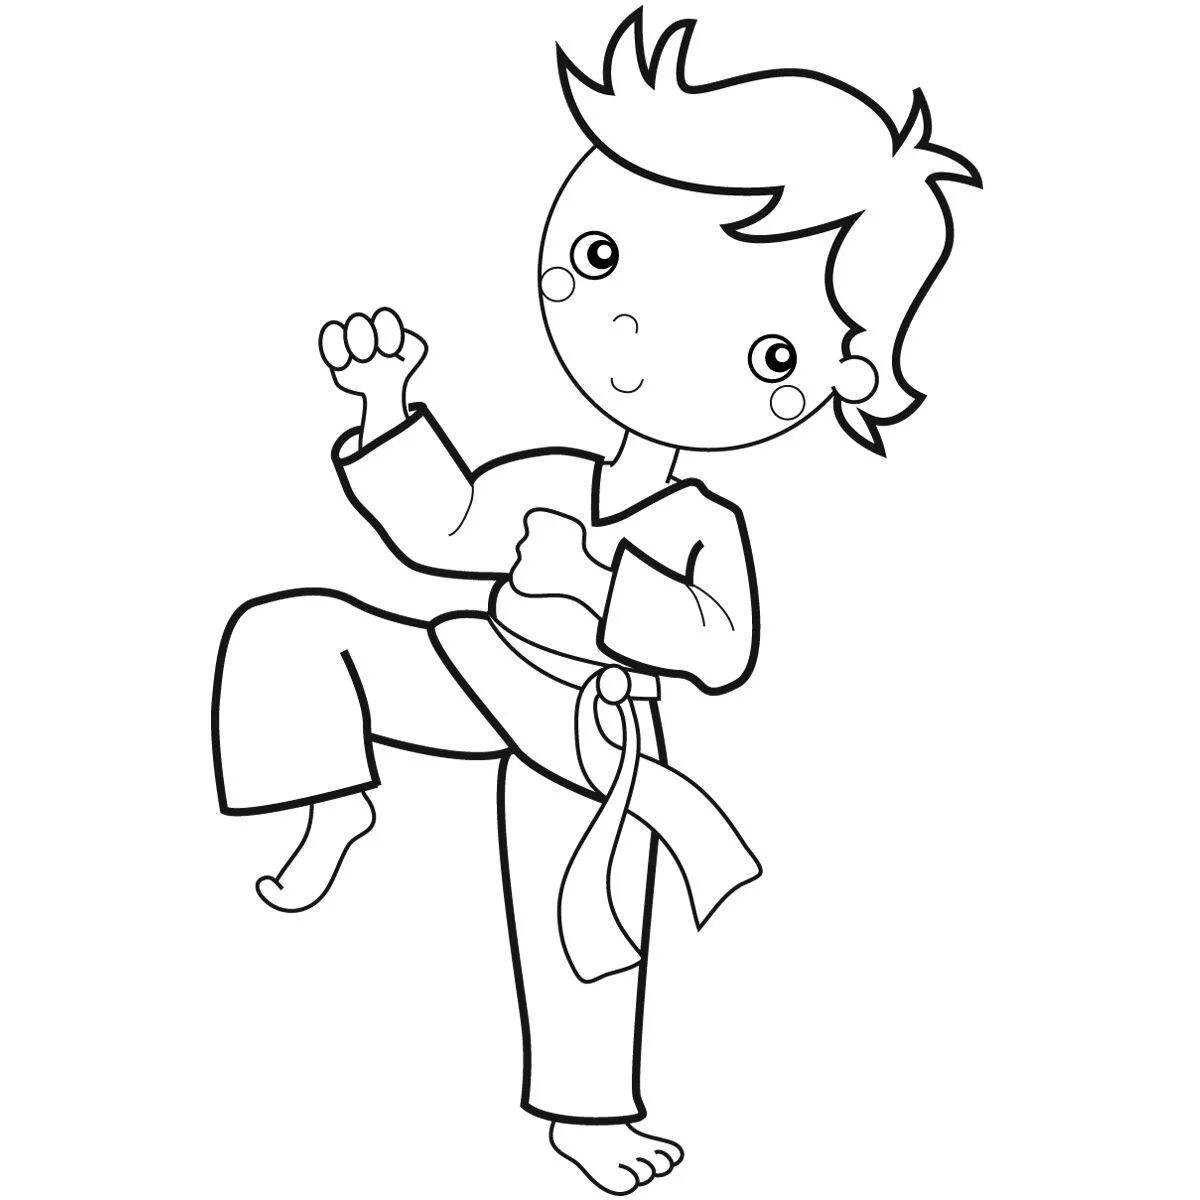 Amazing judo coloring pages for kids